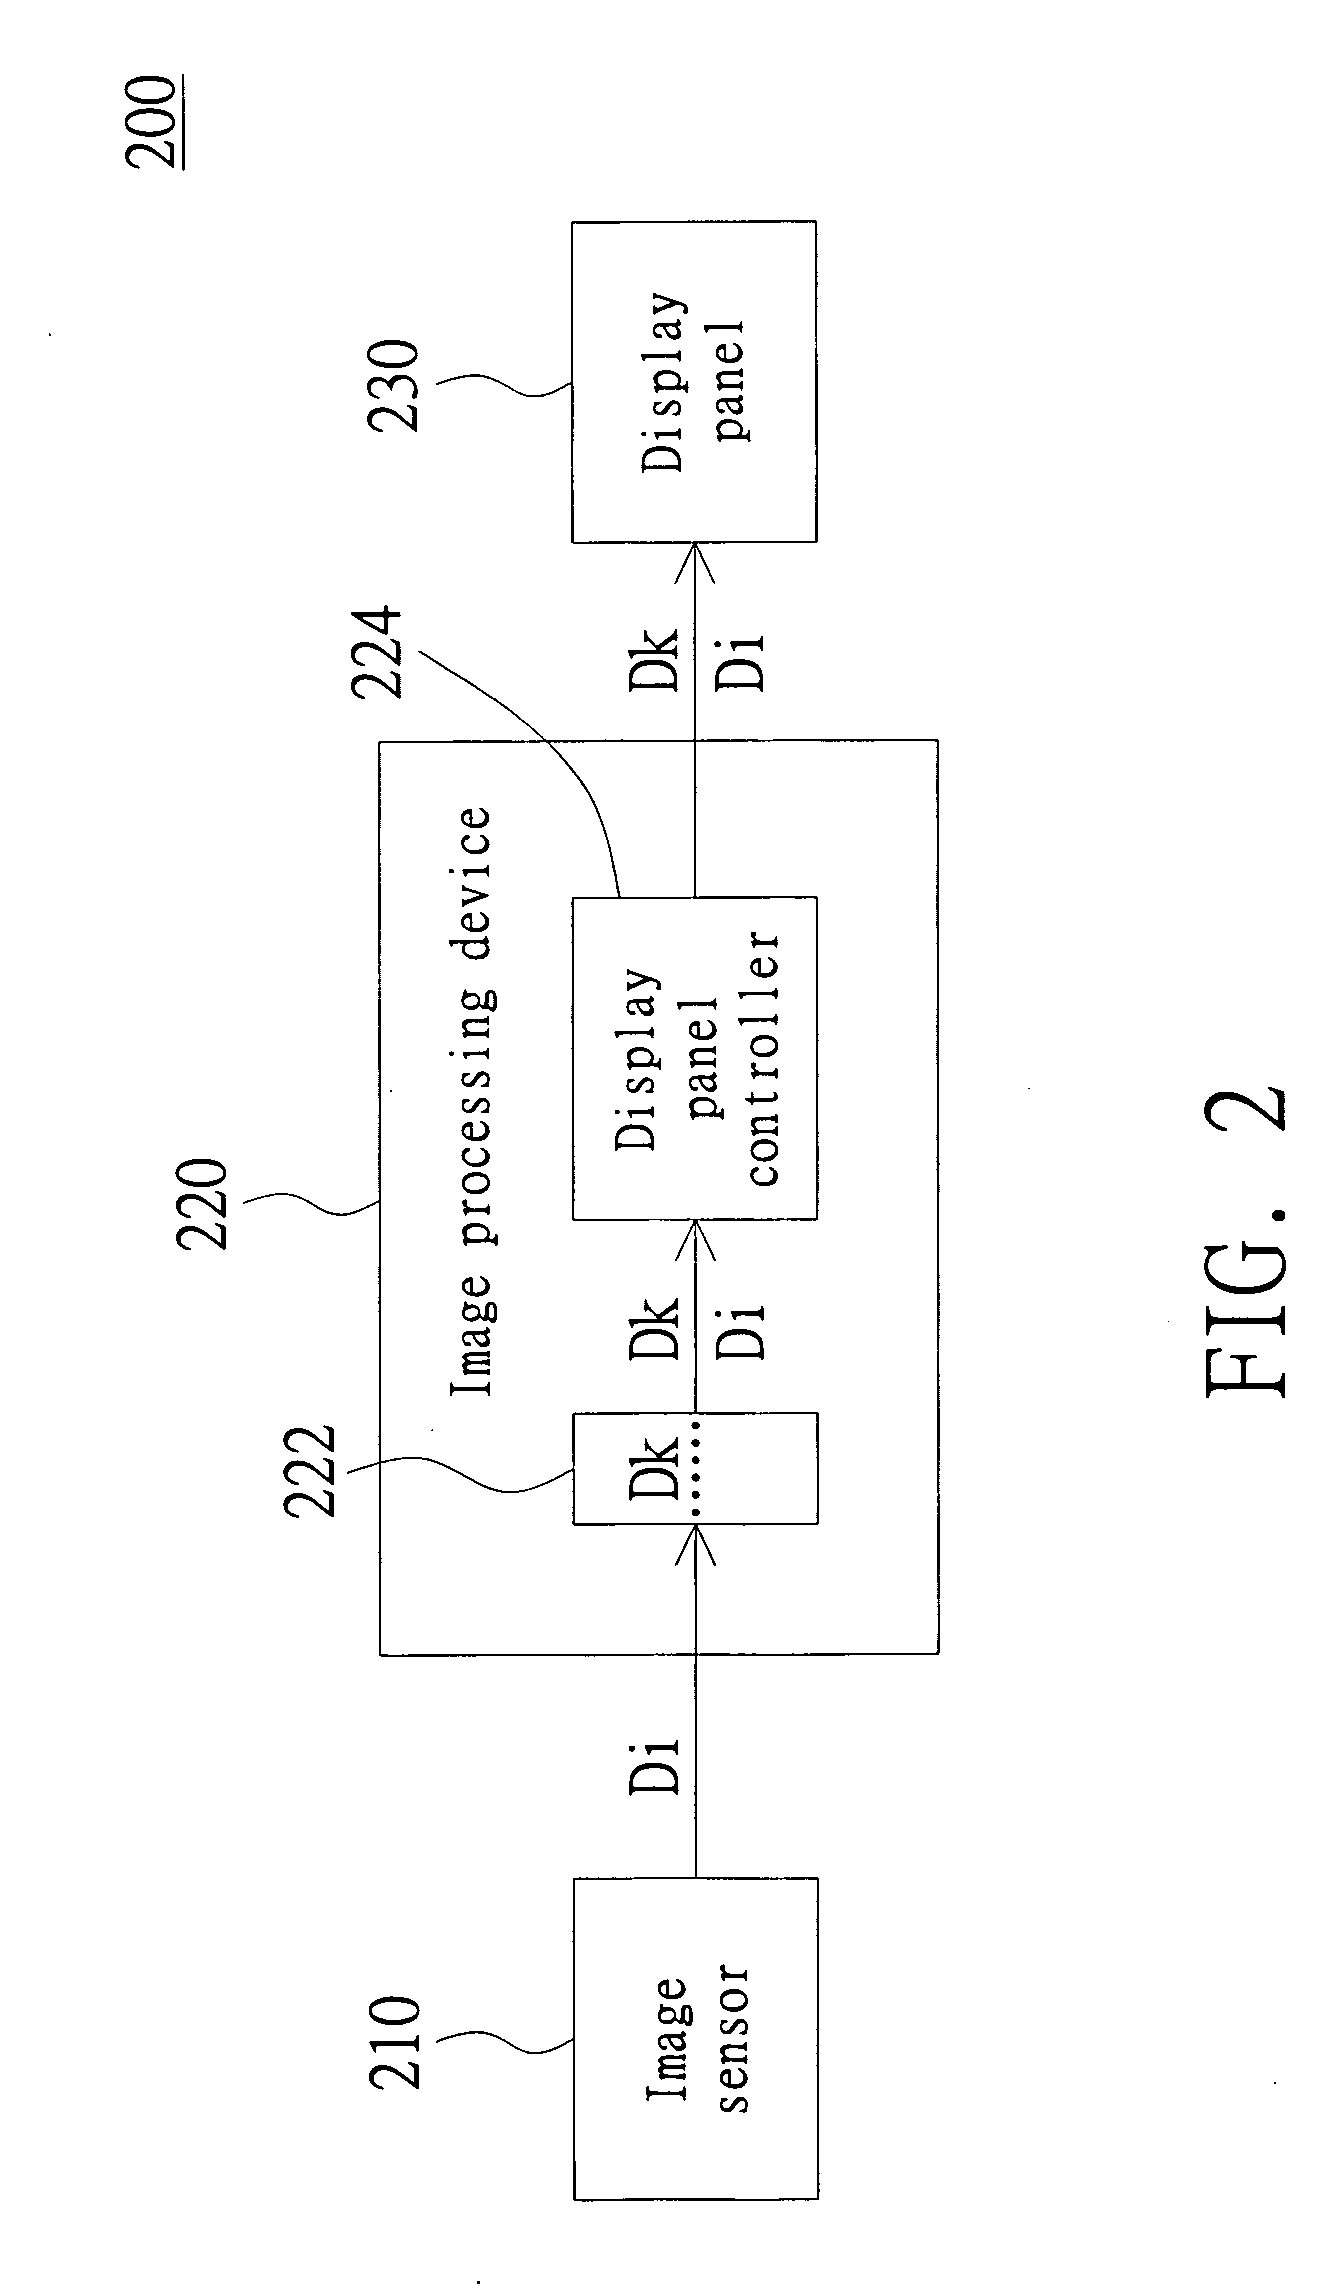 Image processing device